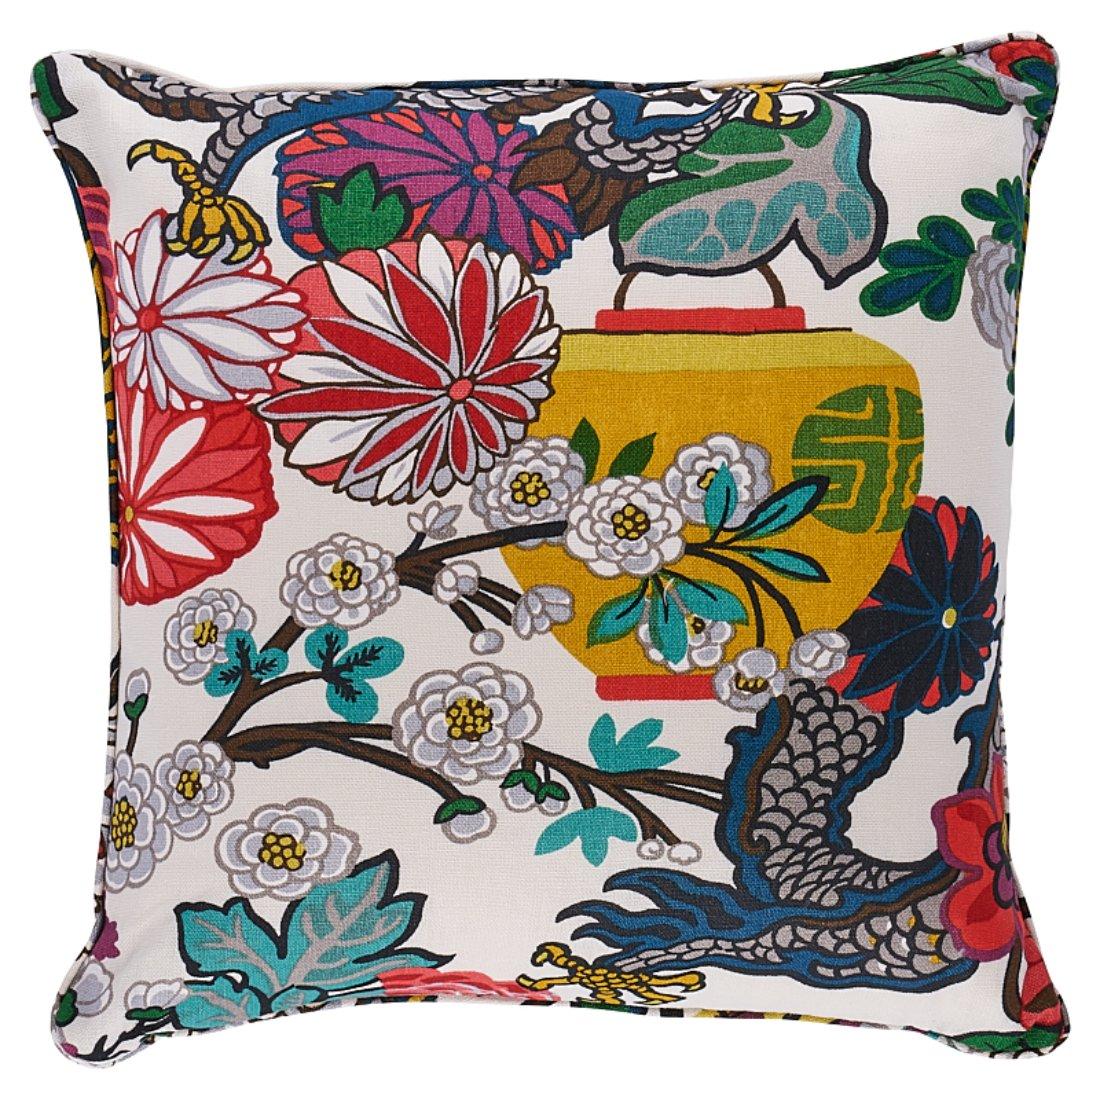 This pillow features Chiang Mai Dragon with a Self-Welt finish. An instant hit from the moment we introduced it, this is one of our best-loved designs. The chinoiserie motif was inspired by an Art Deco print. Pillow includes a feather/down fill